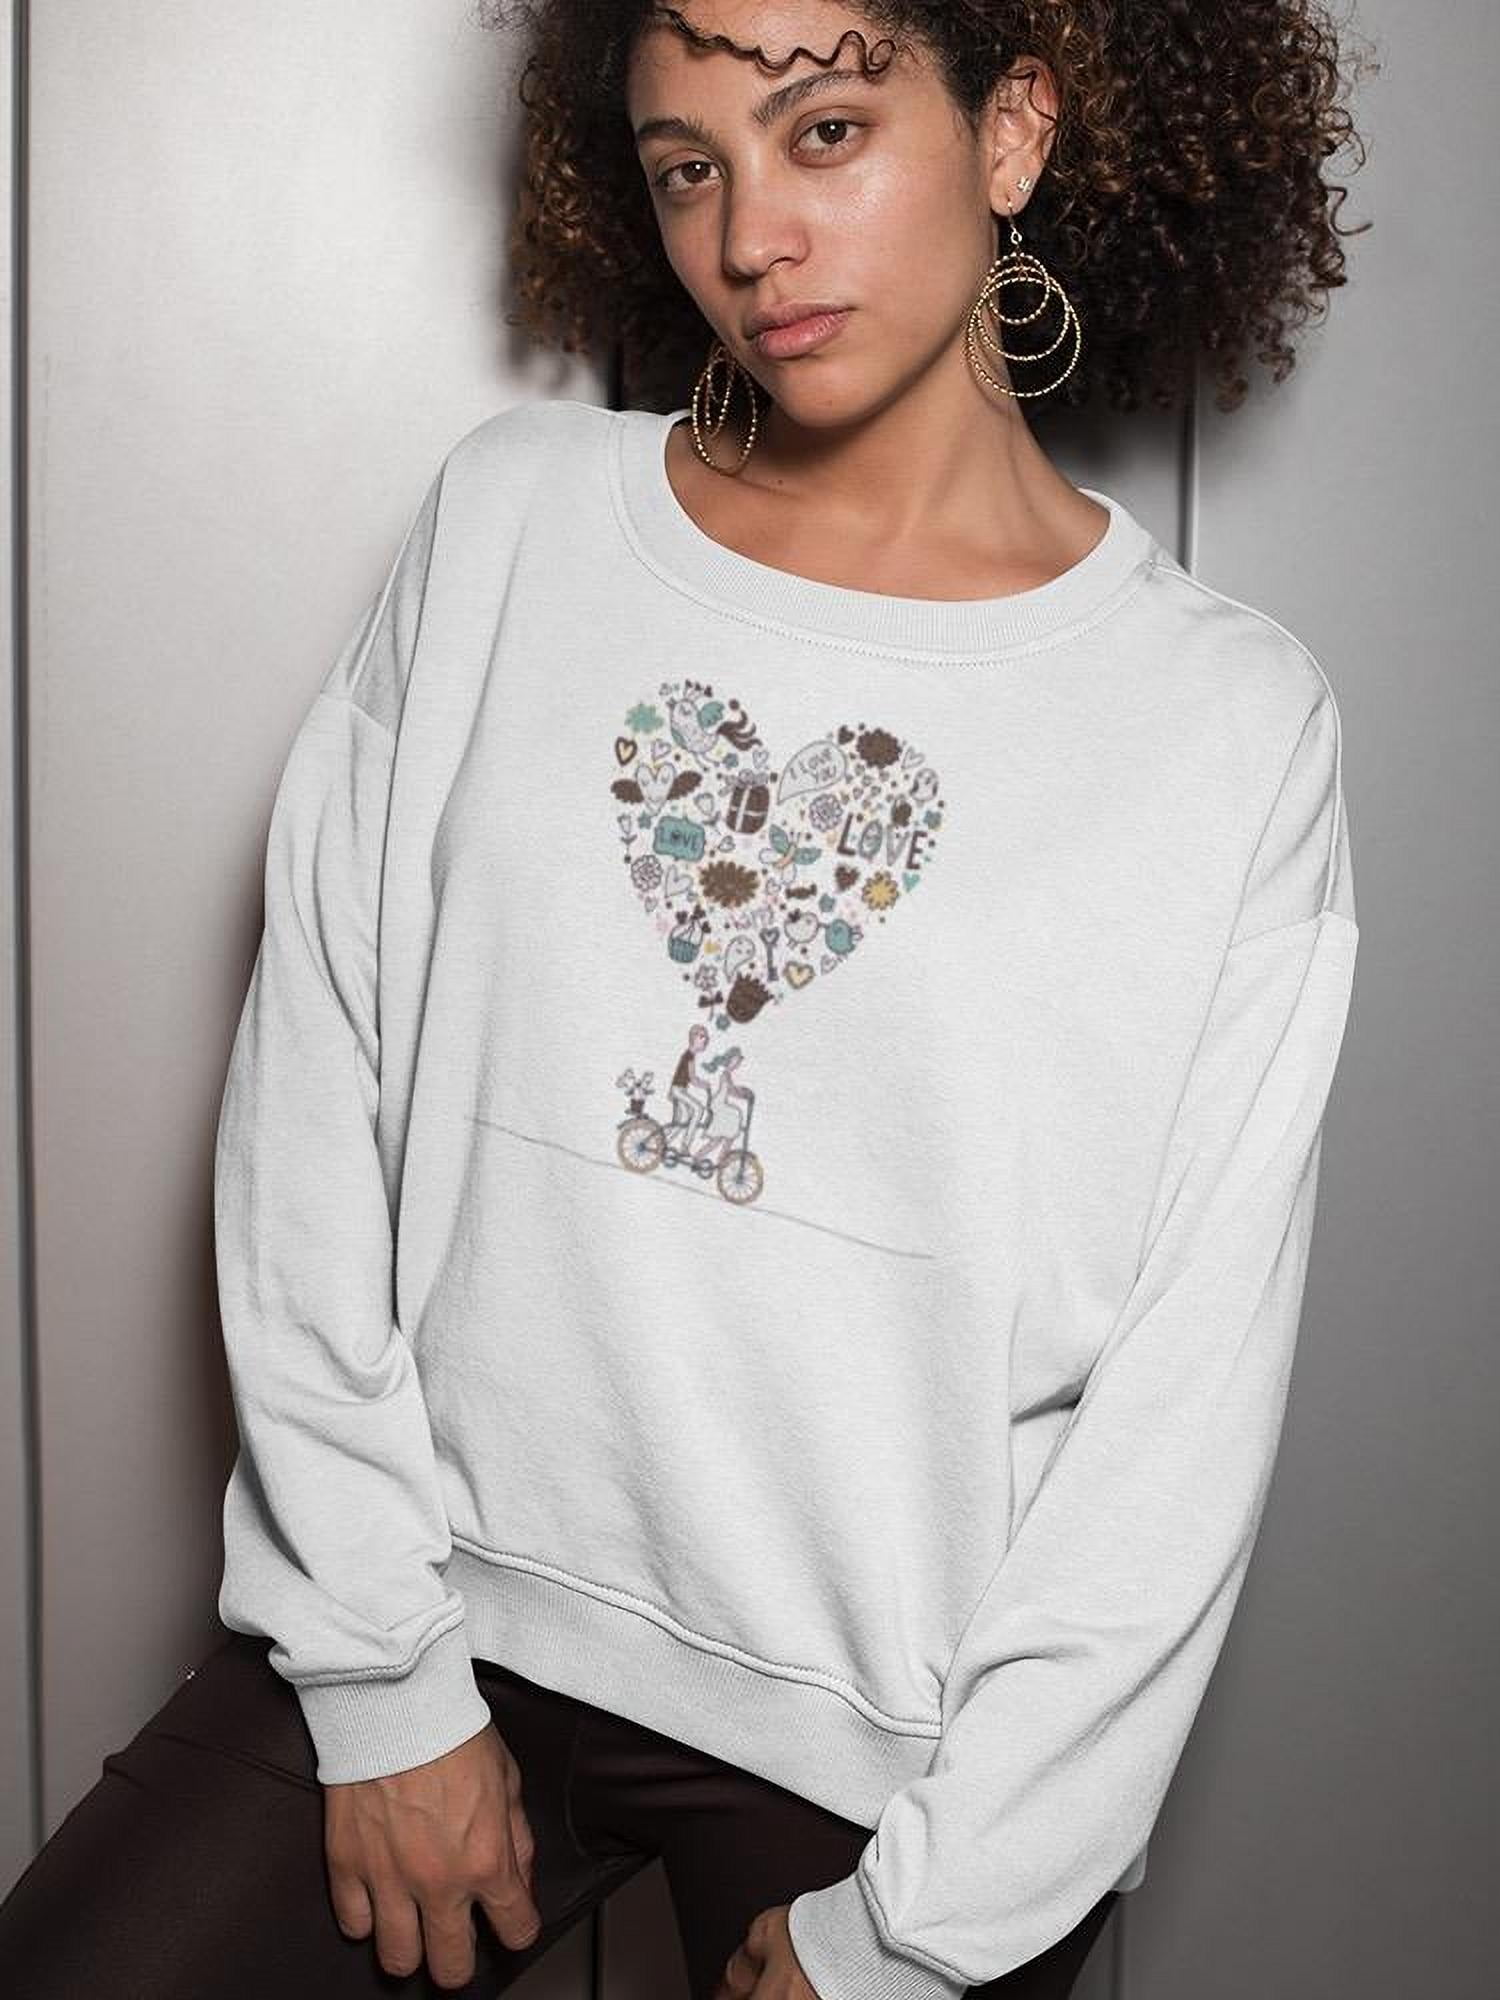 Beautiful Girl With Doodles Women's Tee Image by Shutterstock